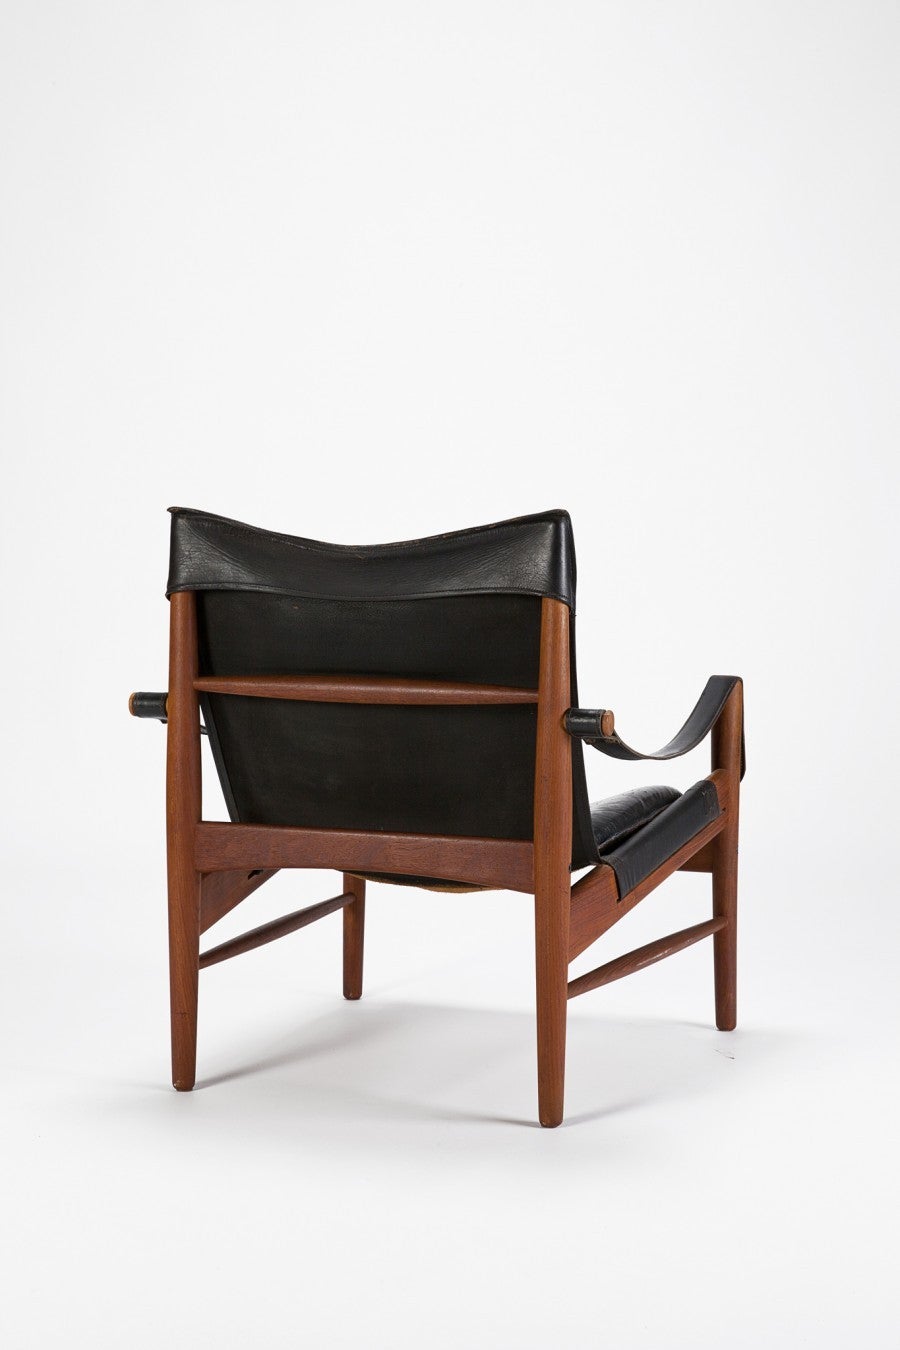 Rare swedish safari chair, model Antilope by Hans Olsen for M Viskadalens Möbler in Sweden 1960's. Solid teak frame and leather upholstery, loose seat cushion, beautiful crafted details! Marked to underside with 